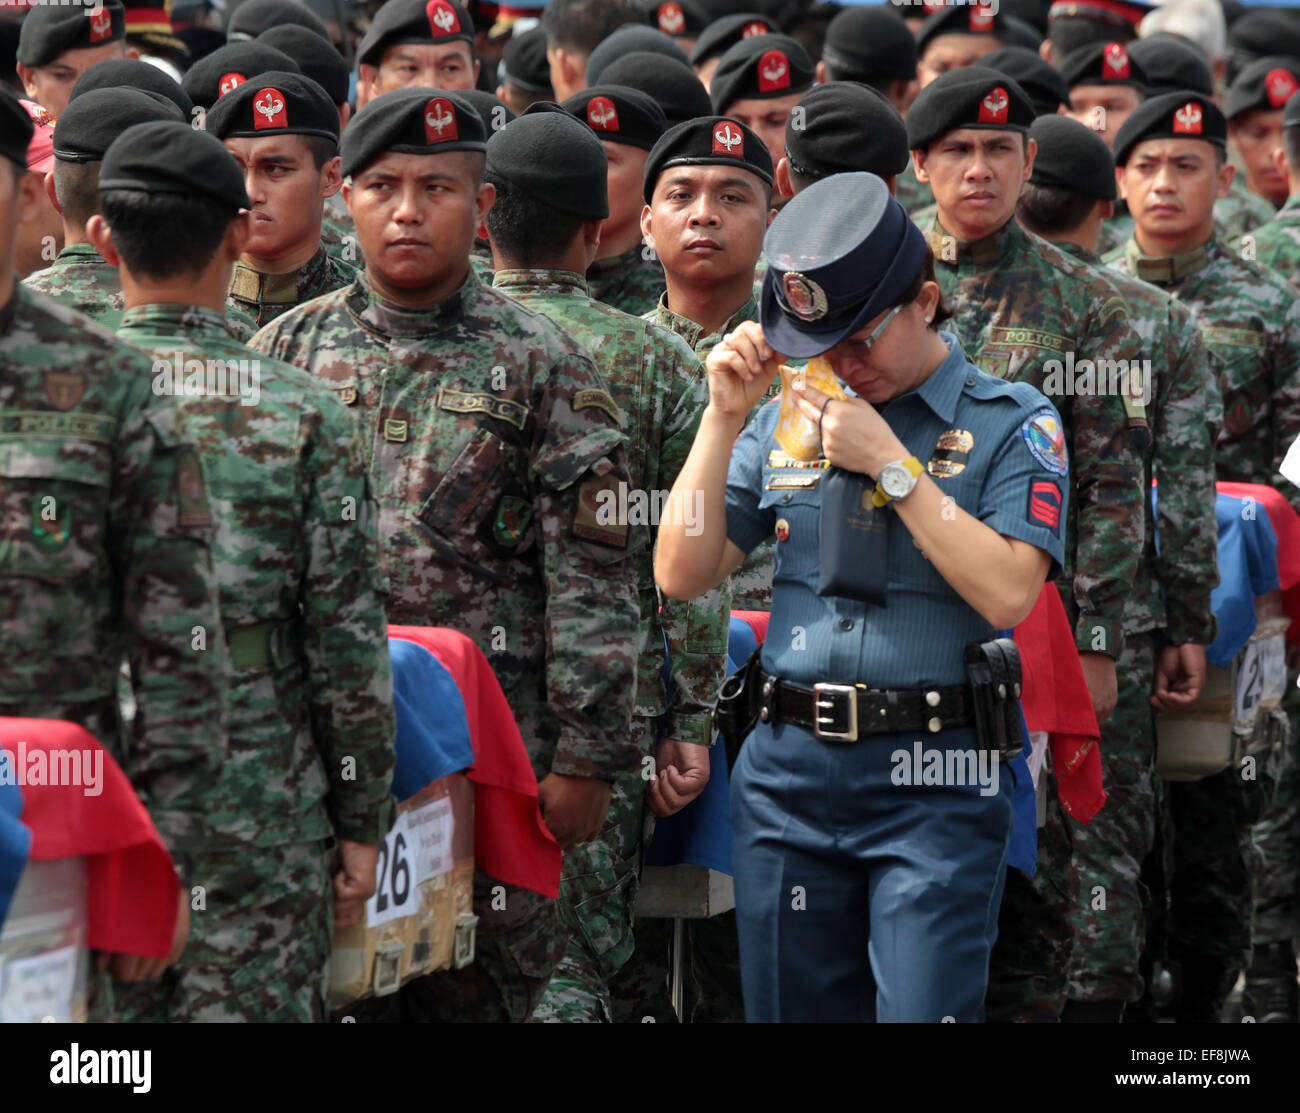 Pasay City, Philippines. 29th Jan, 2015. A policewoman weeps as she walks past the caskets carrying the fallen members of the Philippine National Police Special Action Force (PNP-SAF) at the Villamor Air Base in Pasay City, the Philippines, Jan. 29, 2015. Forty-four members of the PNP-SAF were killed allegedly by Moro Islamic Liberation Front and Bangsamoro Islamic Freedom Fighters members on Jan. 25 in Mamasapano, Maguindanao. Credit:  Rouelle Umali/Xinhua/Alamy Live News Stock Photo